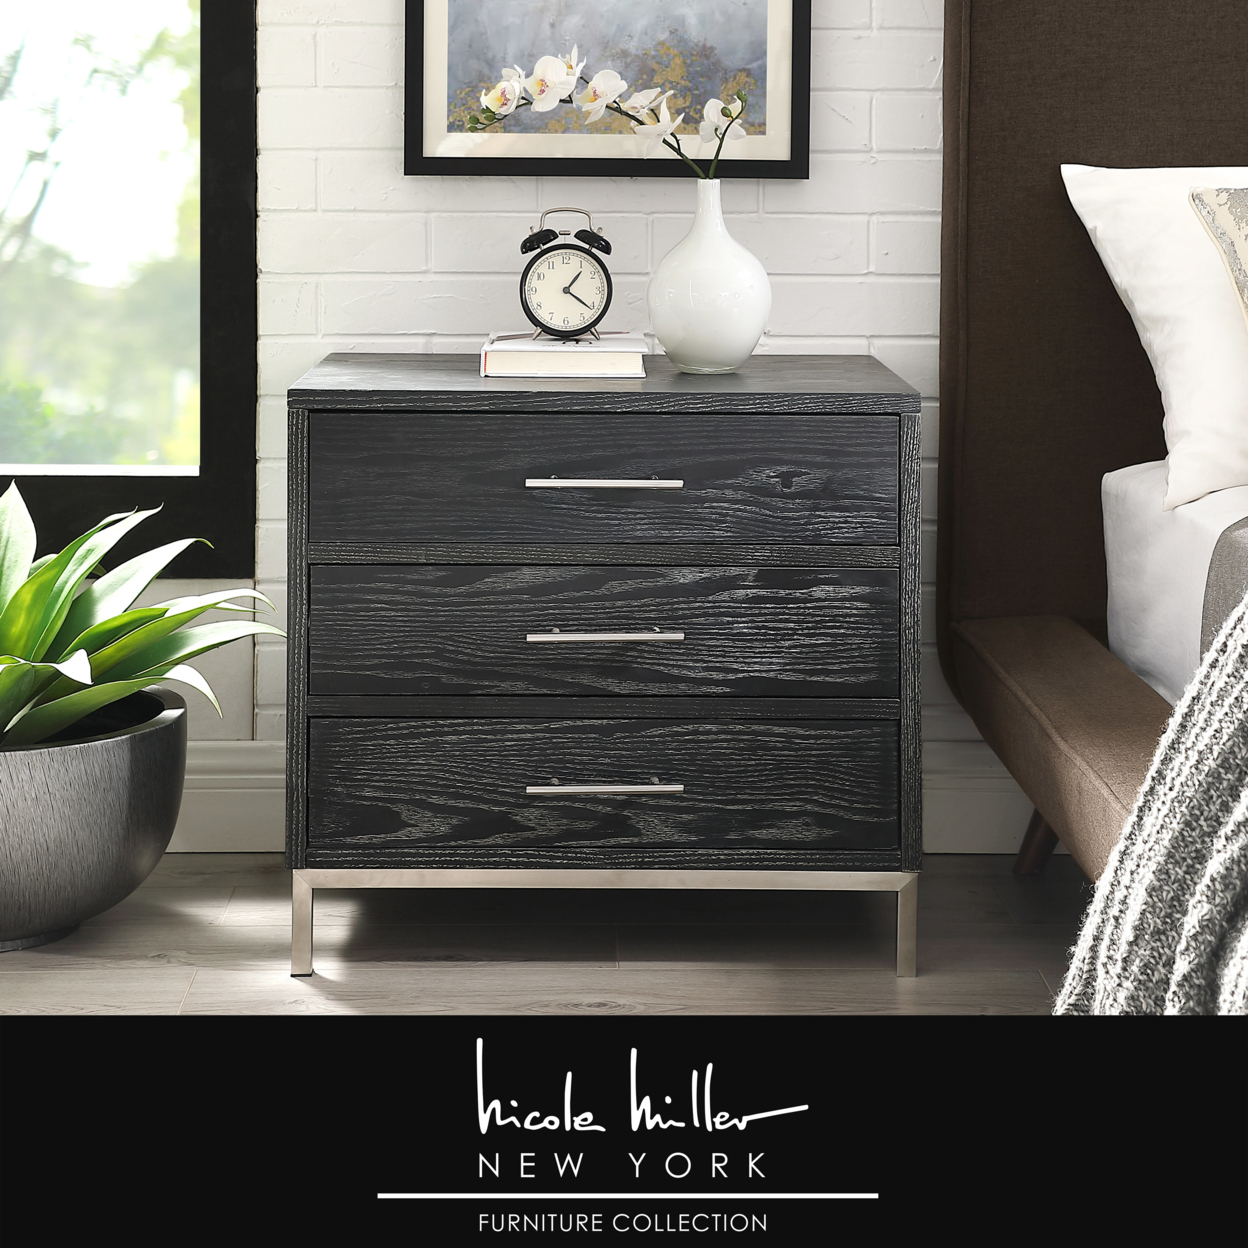 Treni 3 Drawers Nightstand-T-Bar Handle-Stainless Steel Base-Wood Finish-By Nicole Miller - Black/chrome